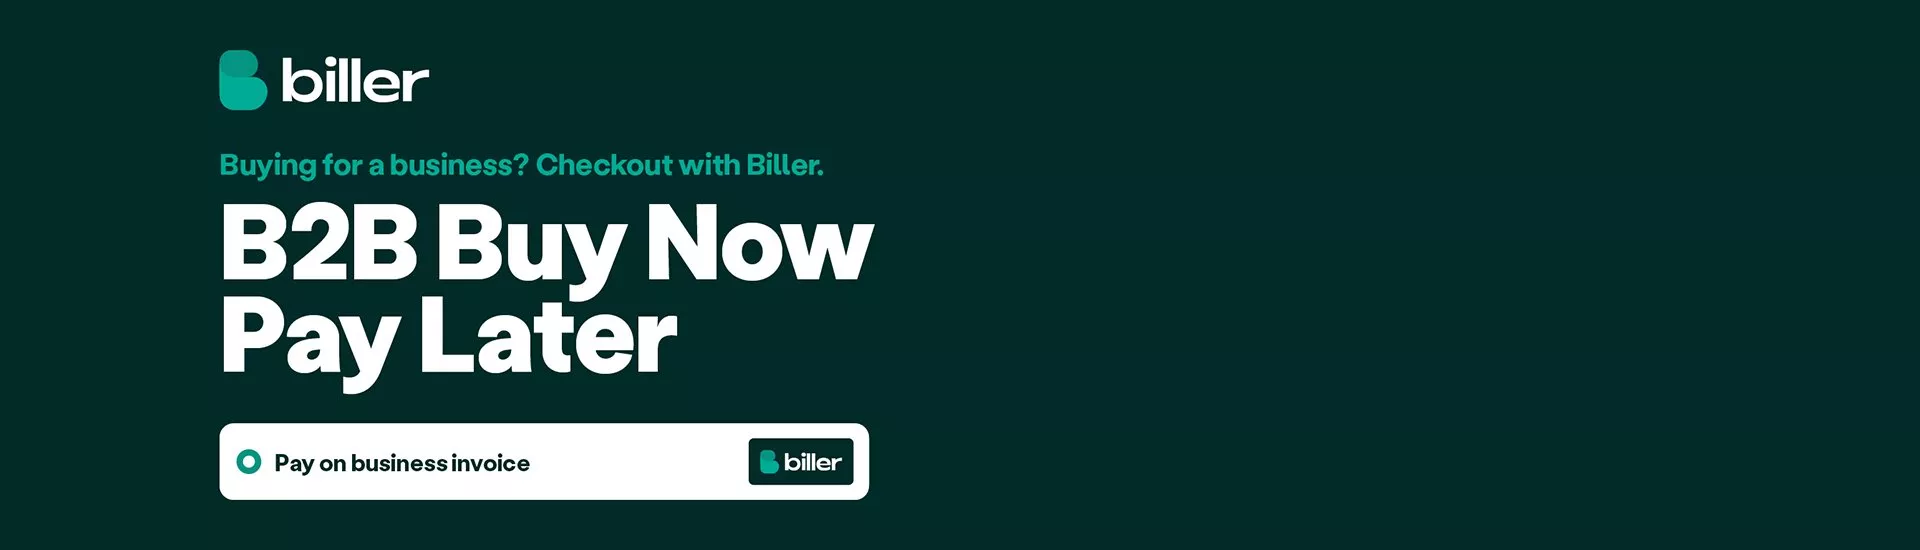 Biller available for B2B, buy now pay later